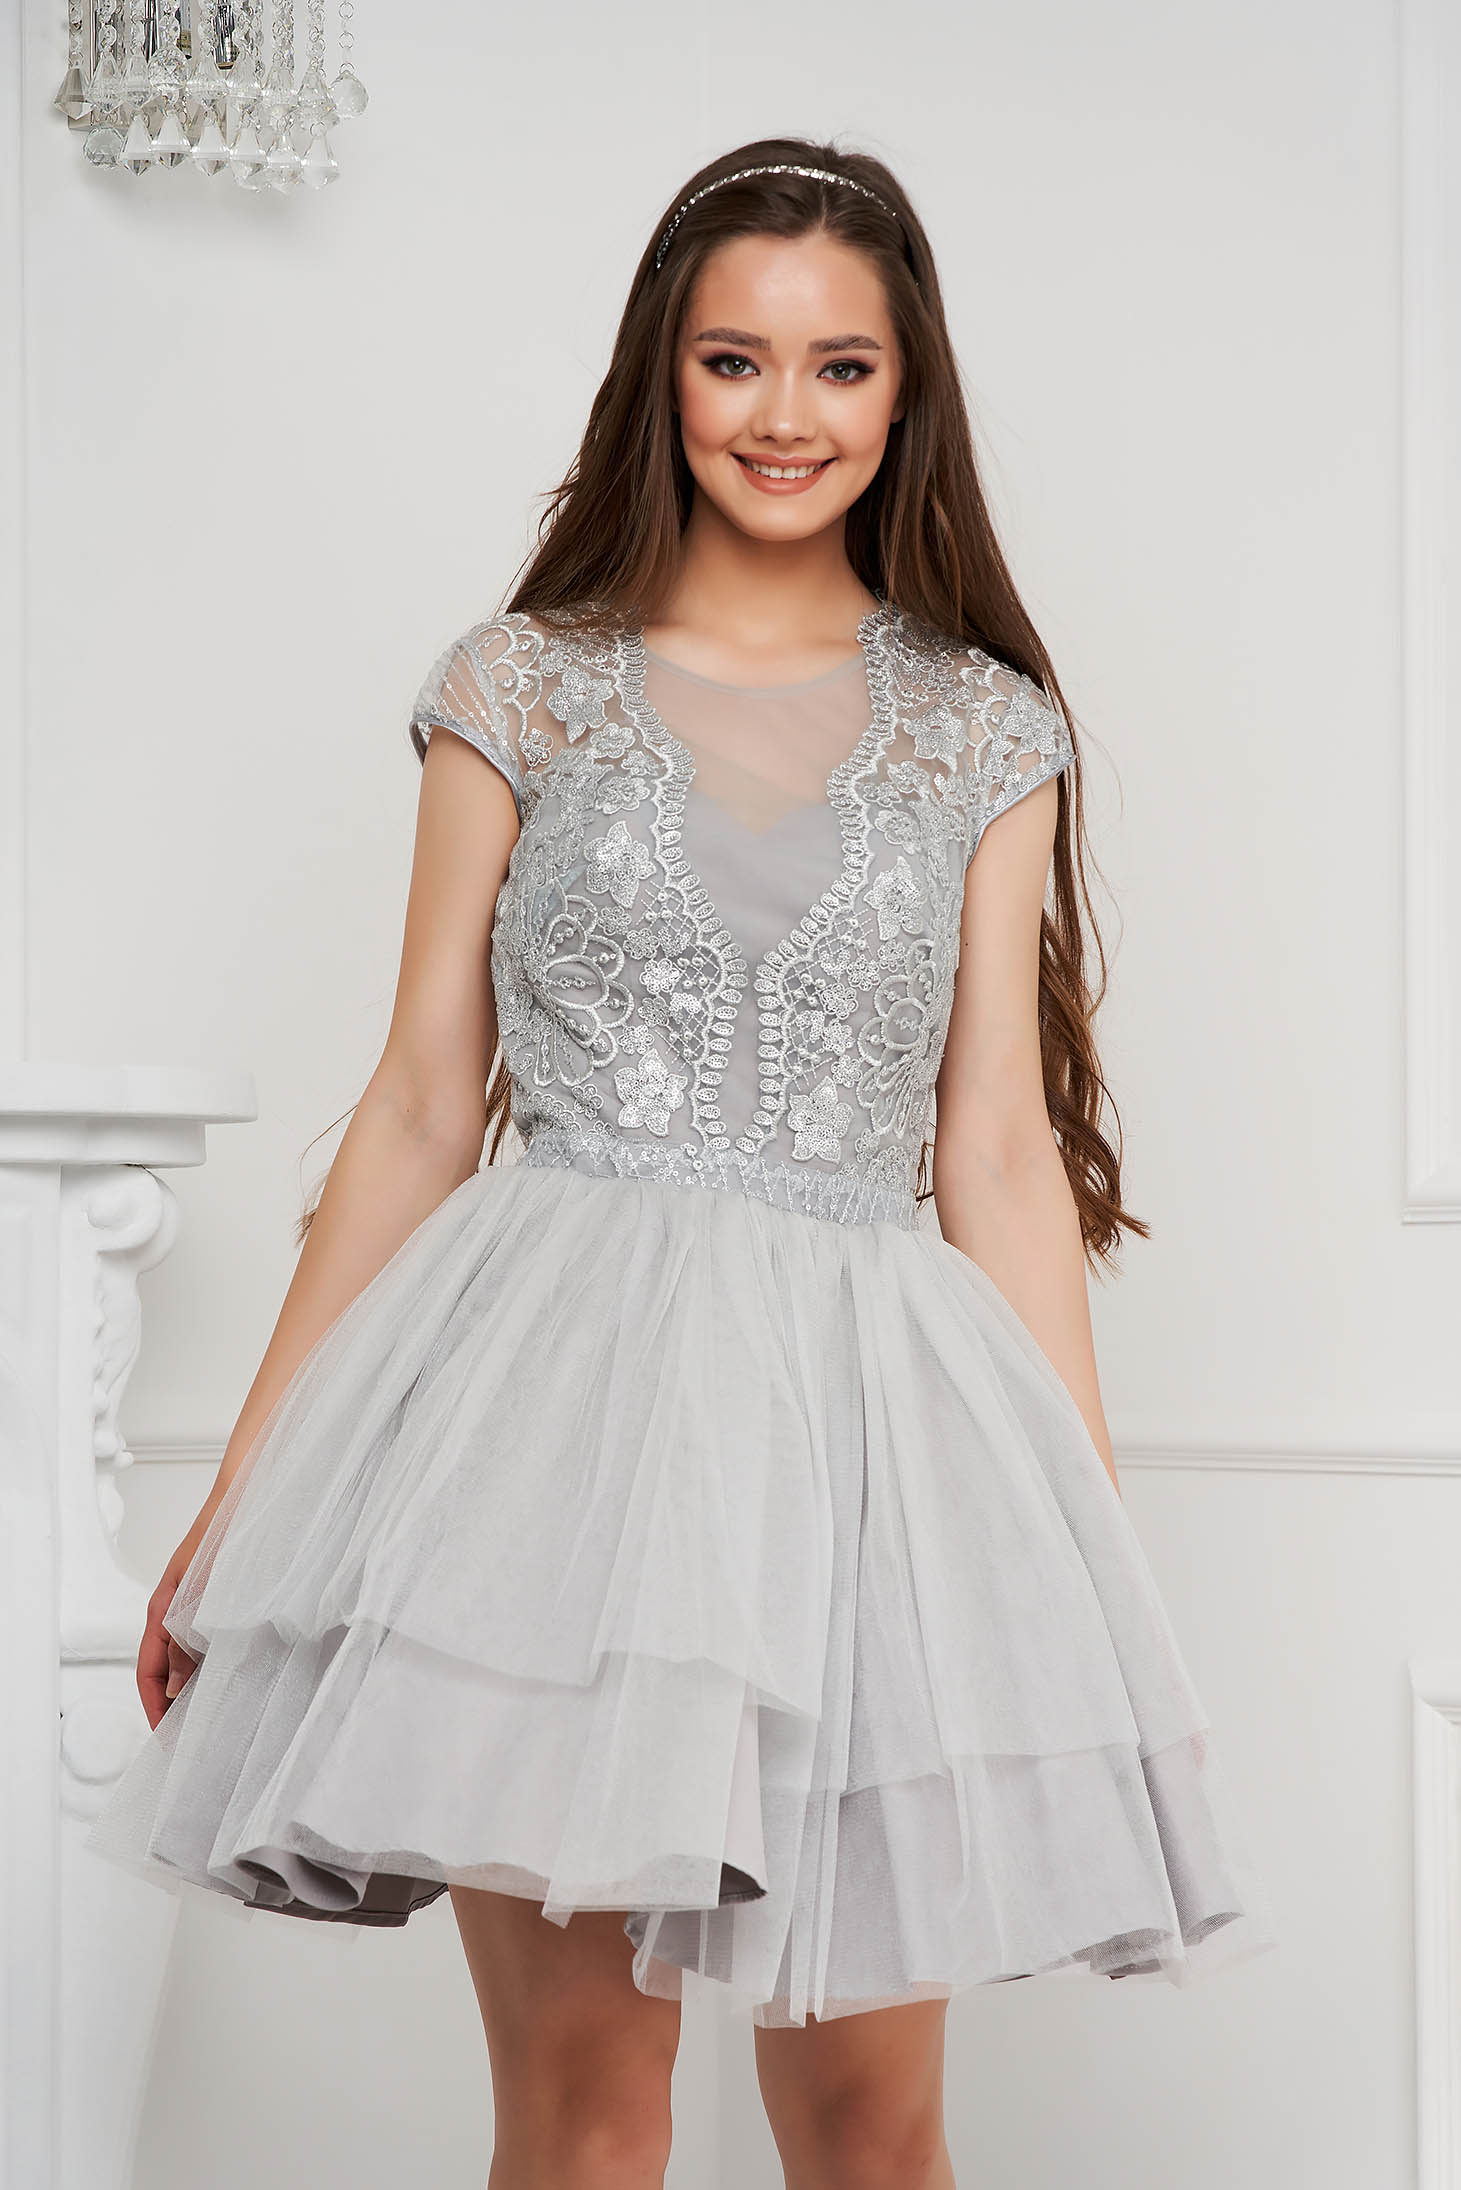 Grey dress short cut cloche from tulle with sequin embellished details sleeveless